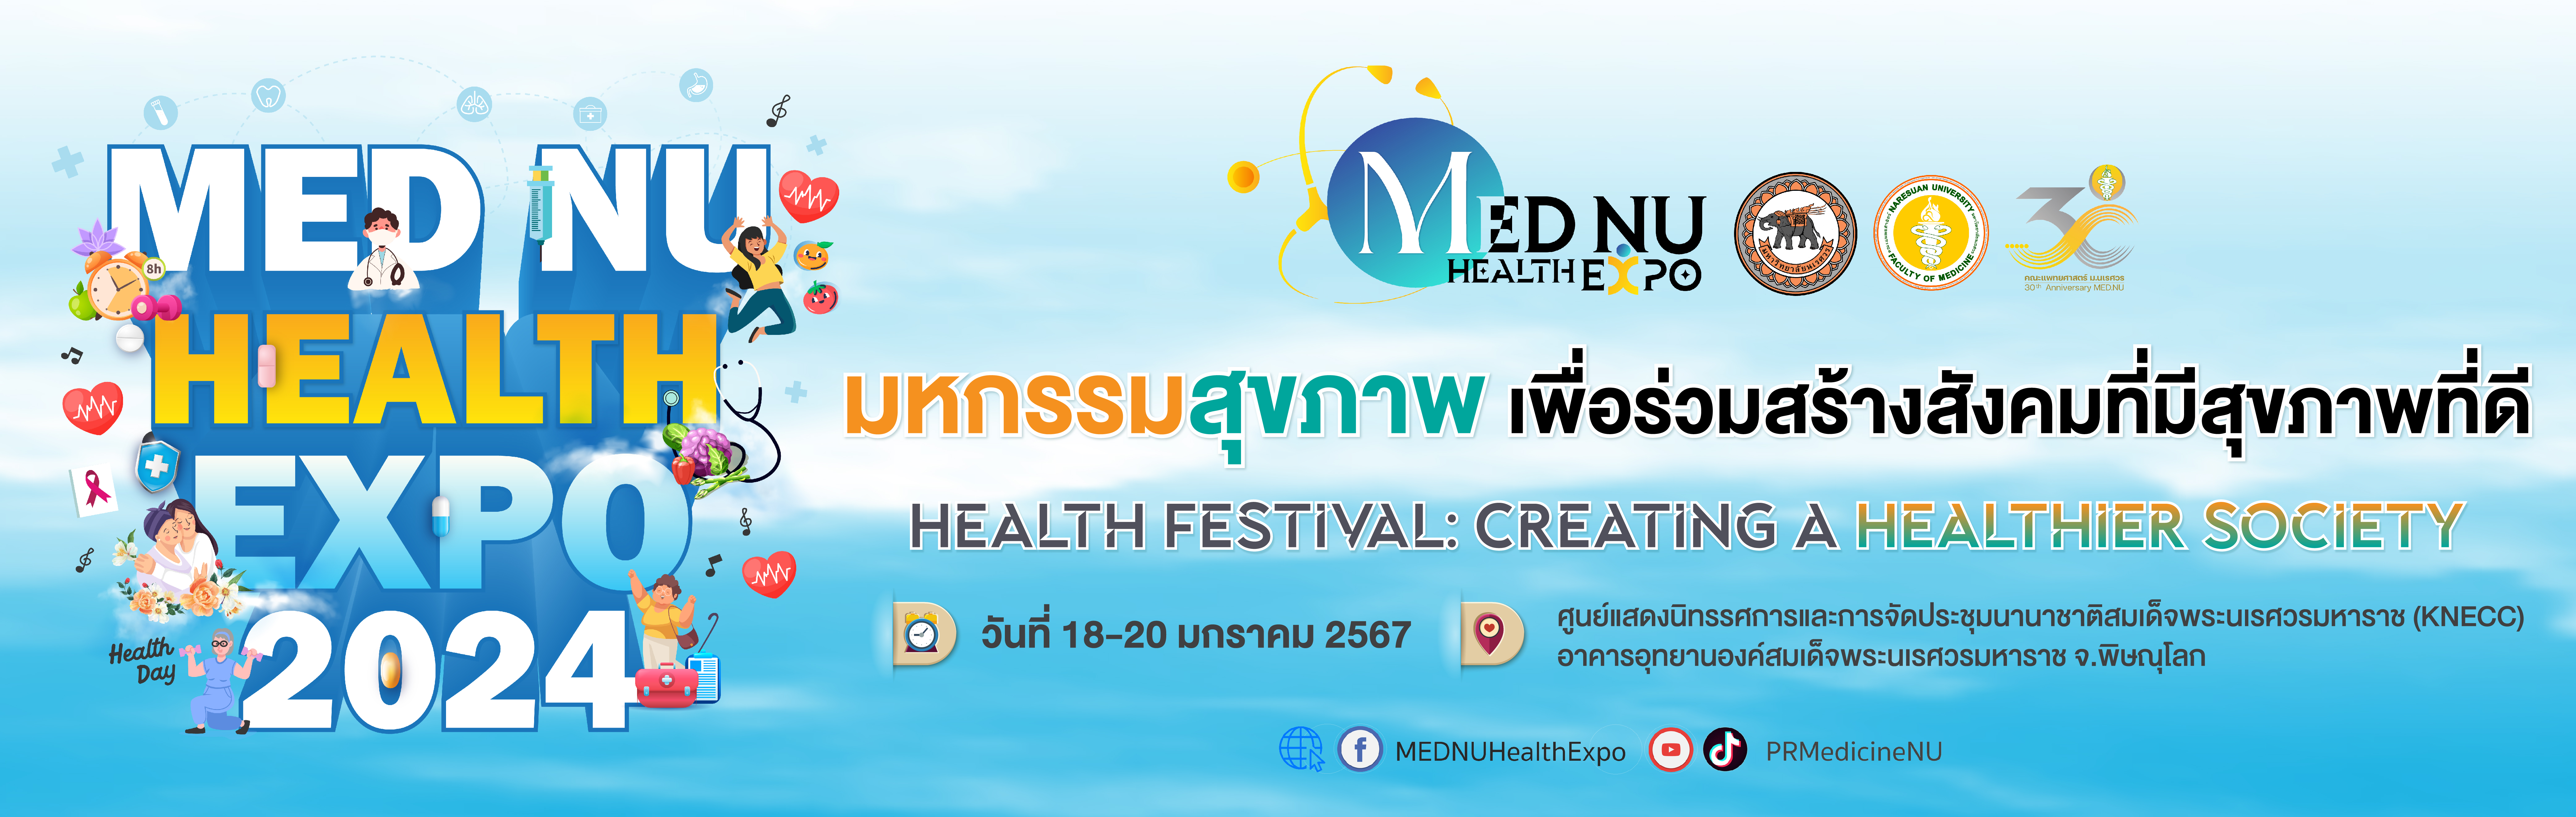 Med NU Health Expo 2024